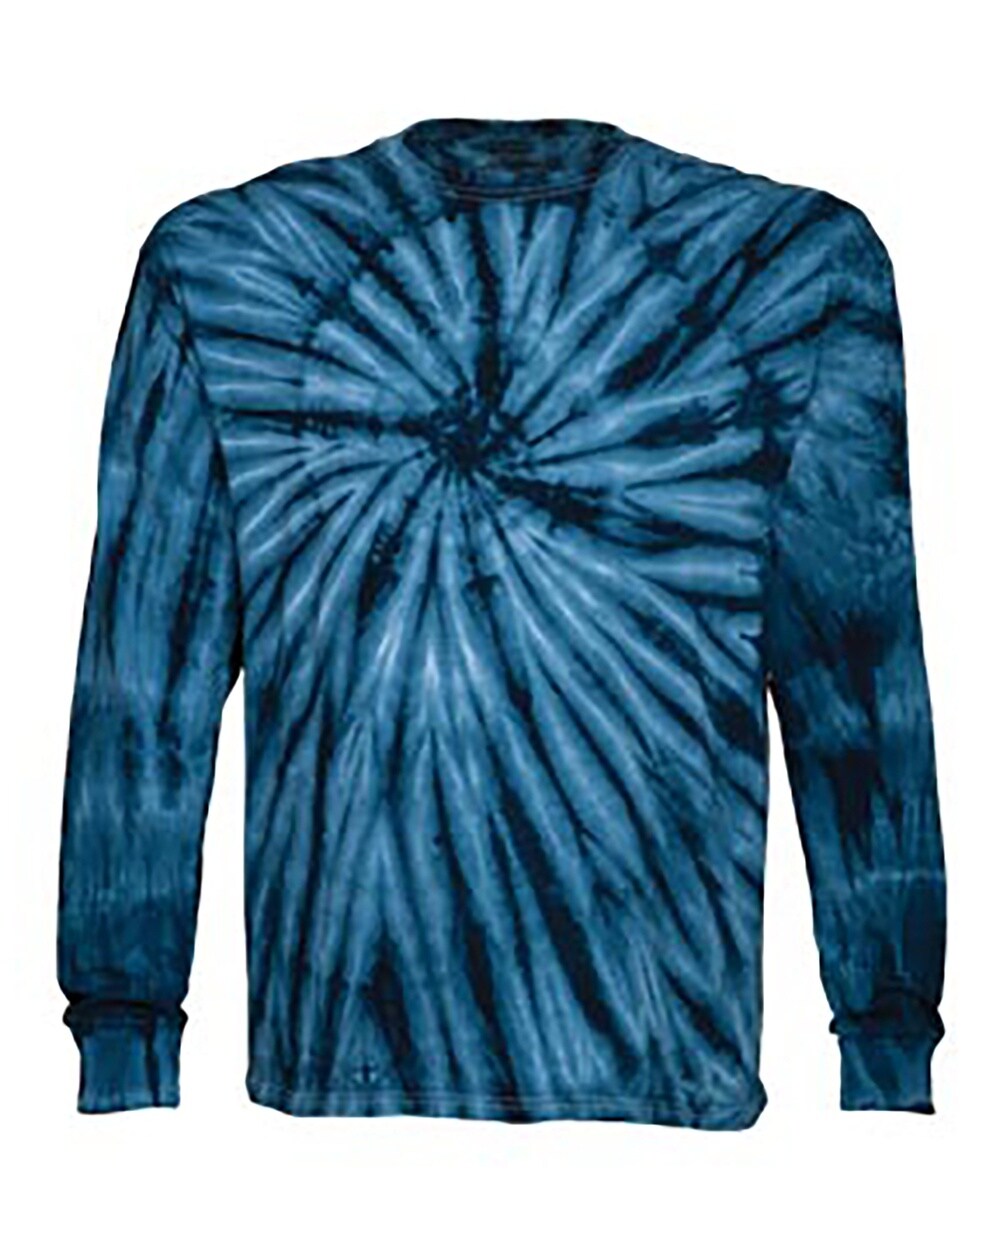 DYENOMITE® Youth Cyclone Tie-Dyed Long Sleeve T-Shirt